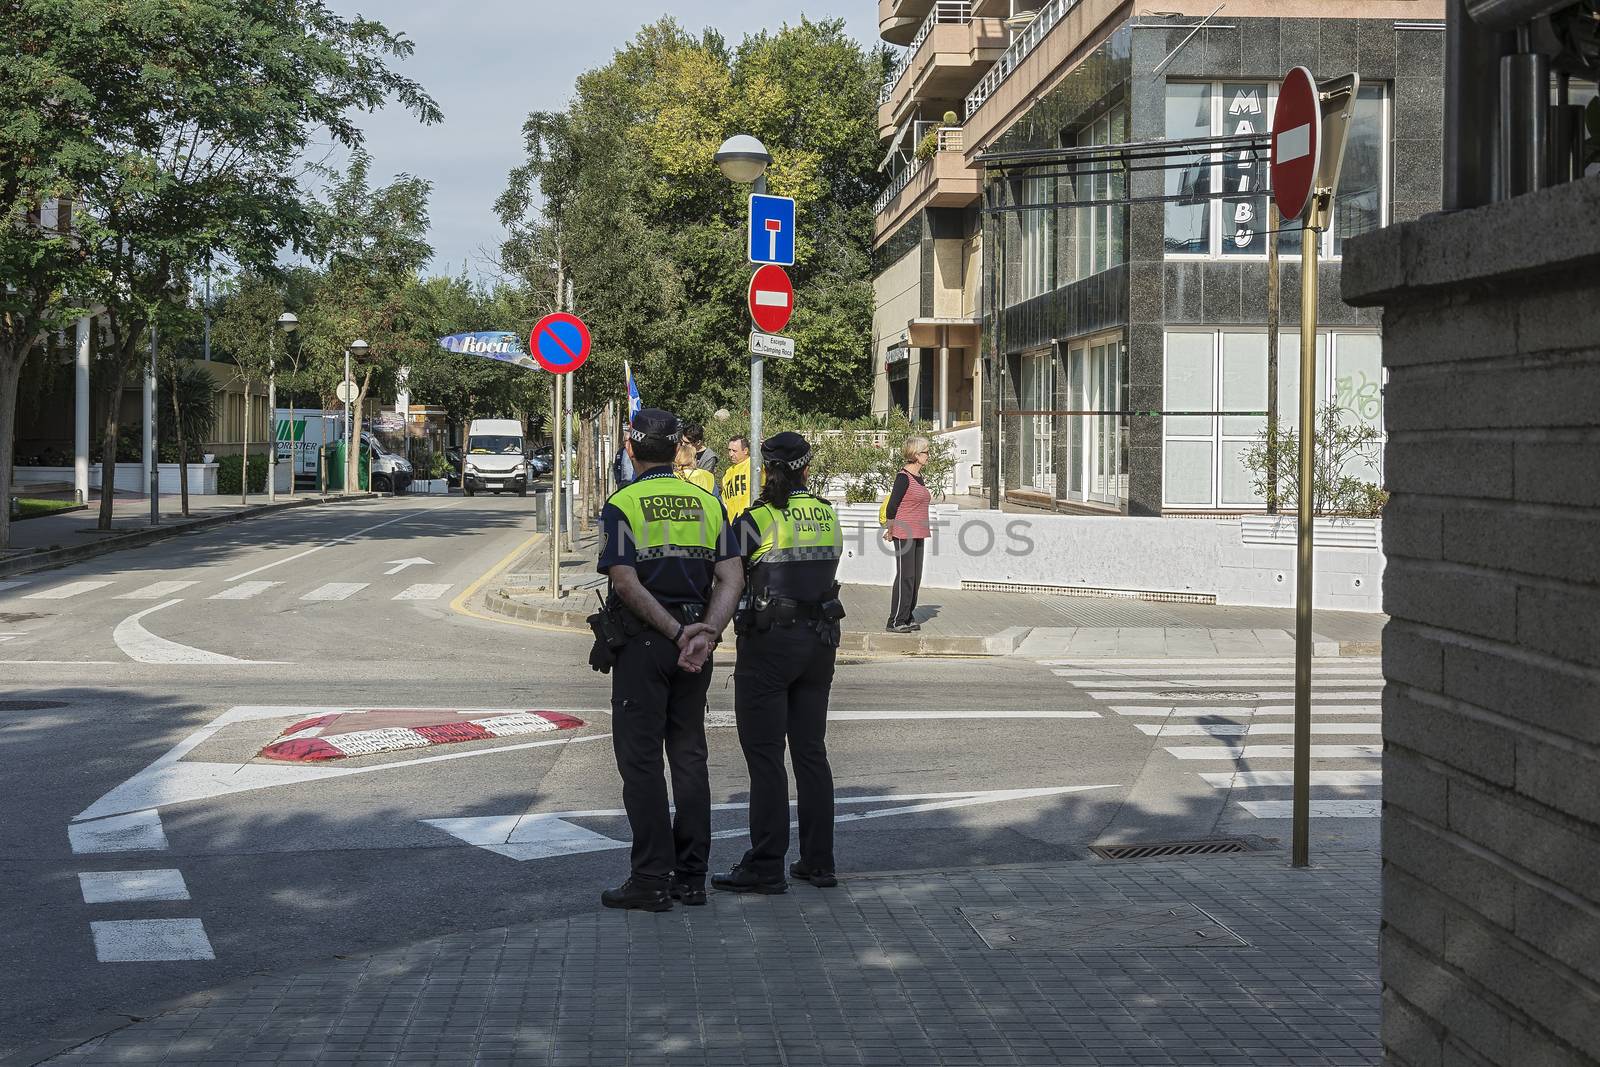 Spain, Blanes - 09/23/2017: Two policemen stand at the crossroads of the city street